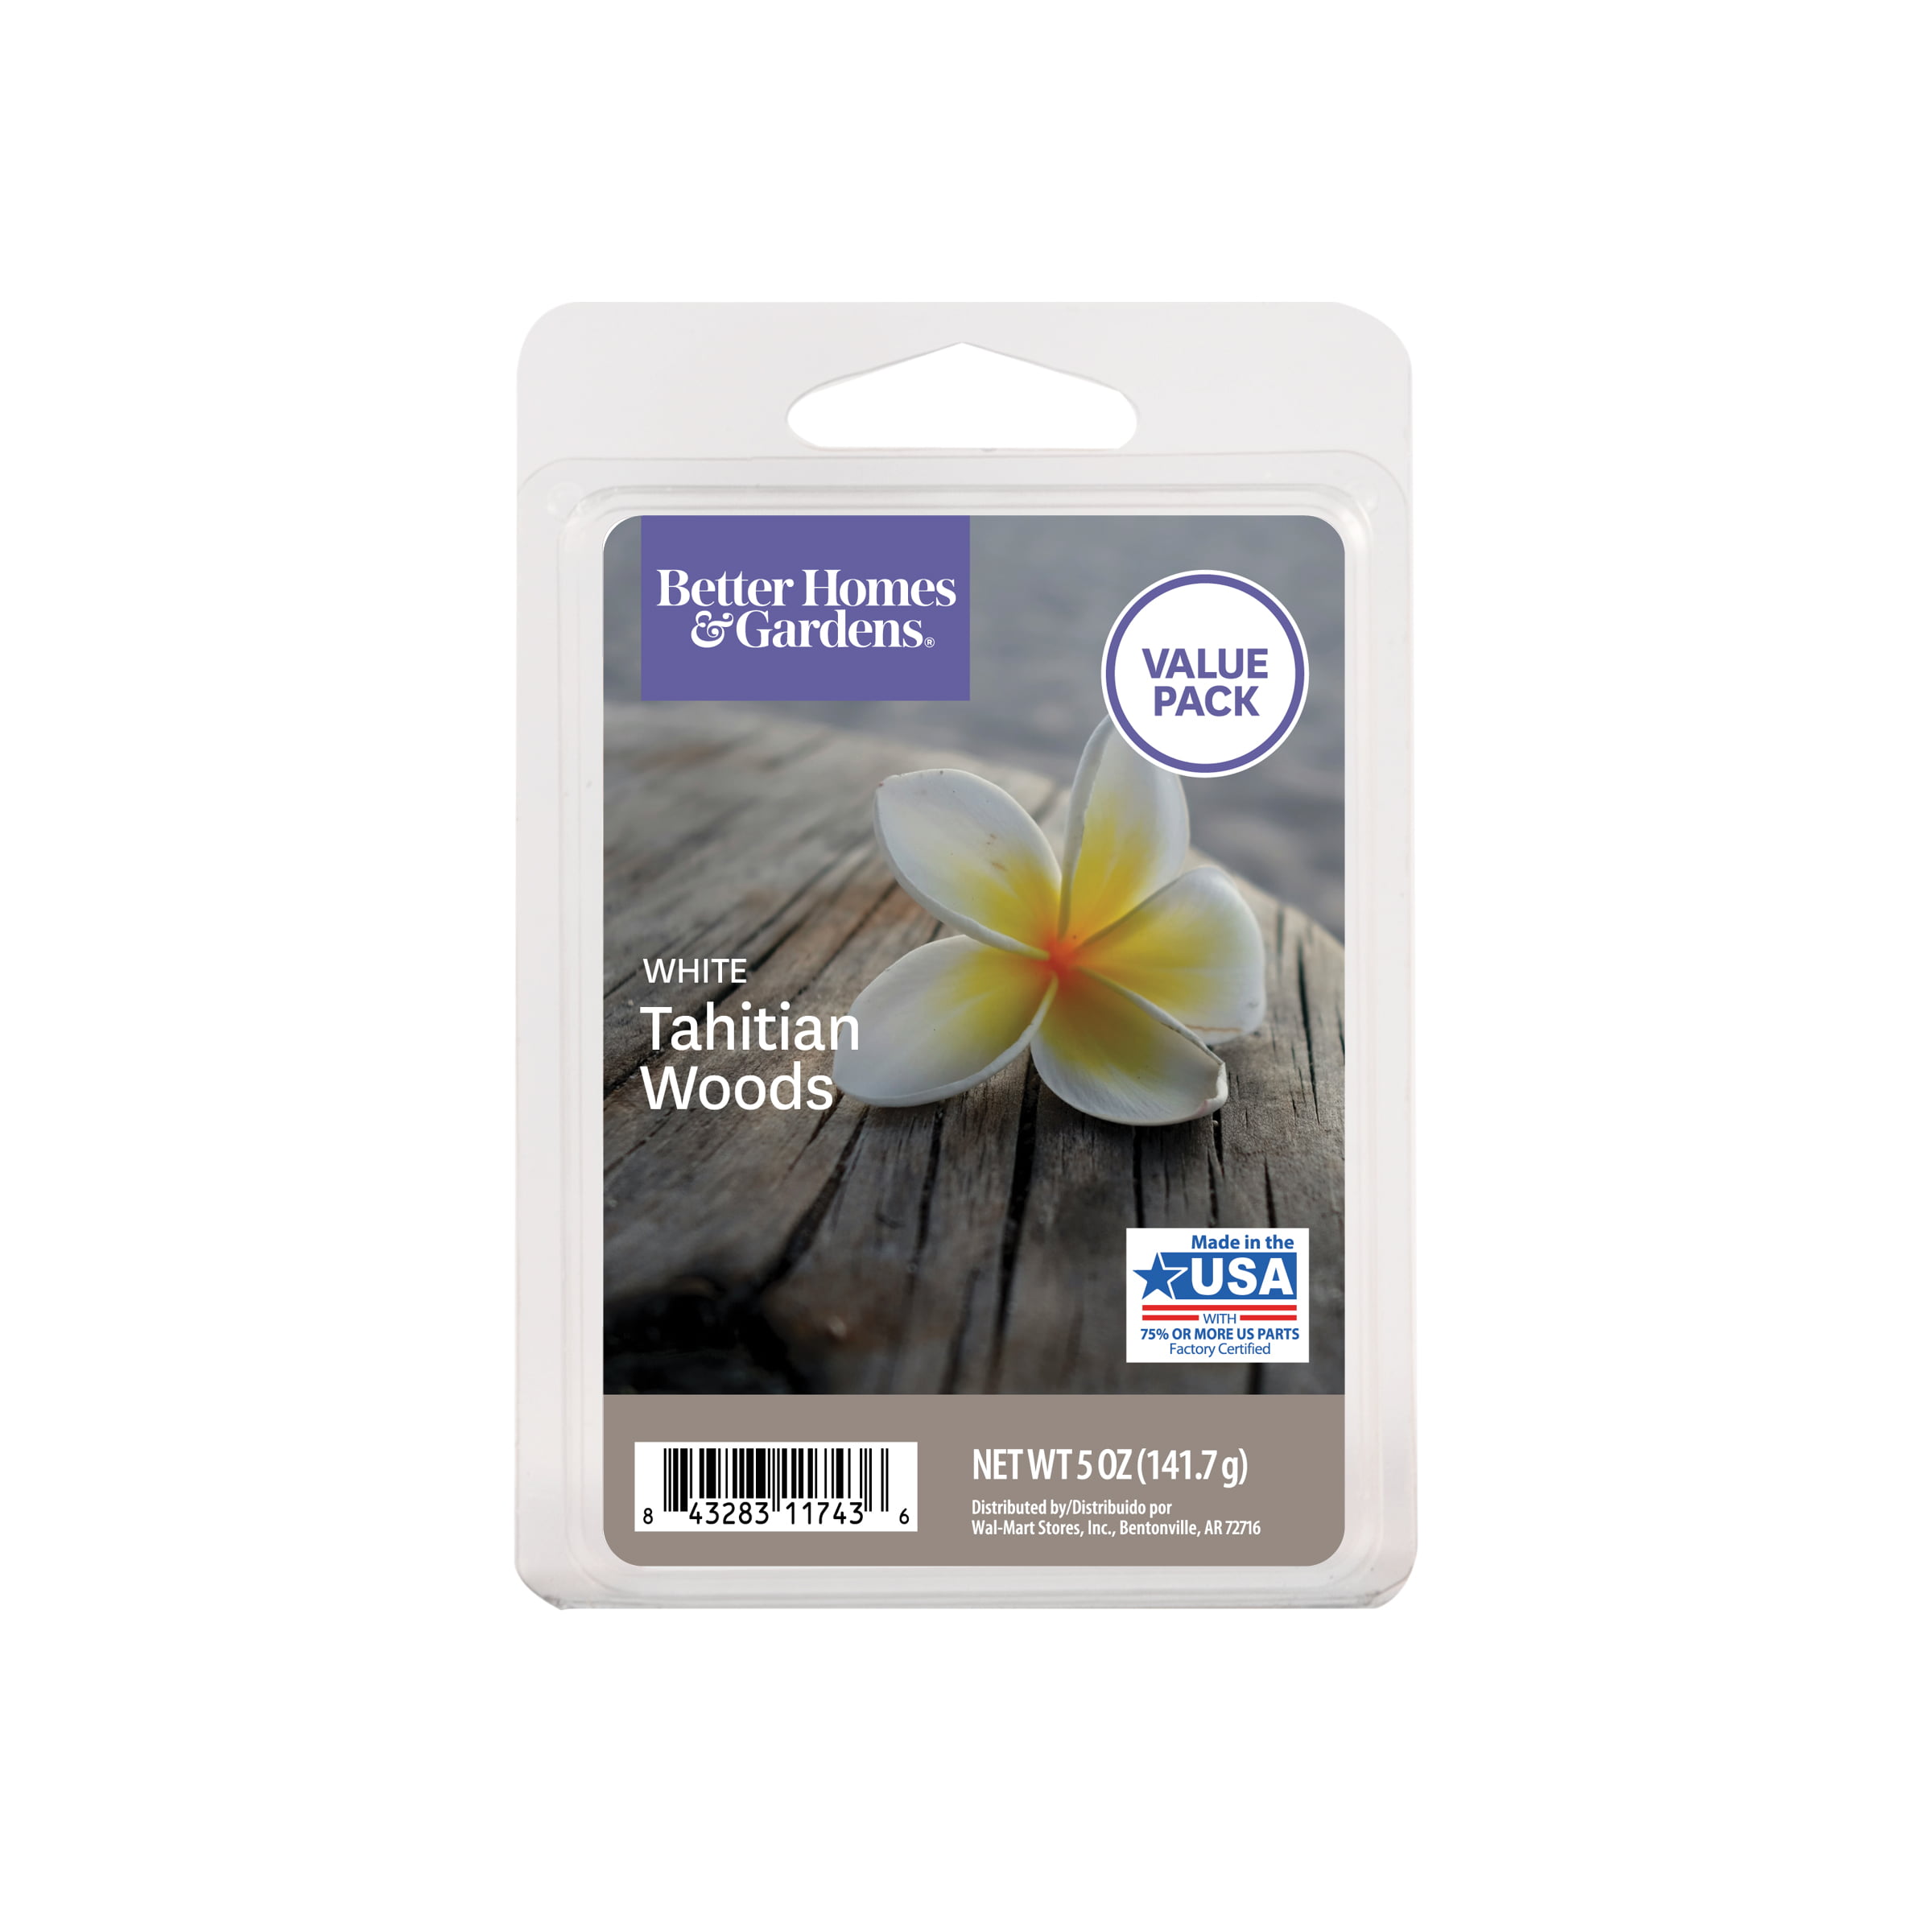 COOLING WATERS  FRAGRANCE FREE POSTAGE SMALL HEARTS 5  DESIGNER WAX MELTS 